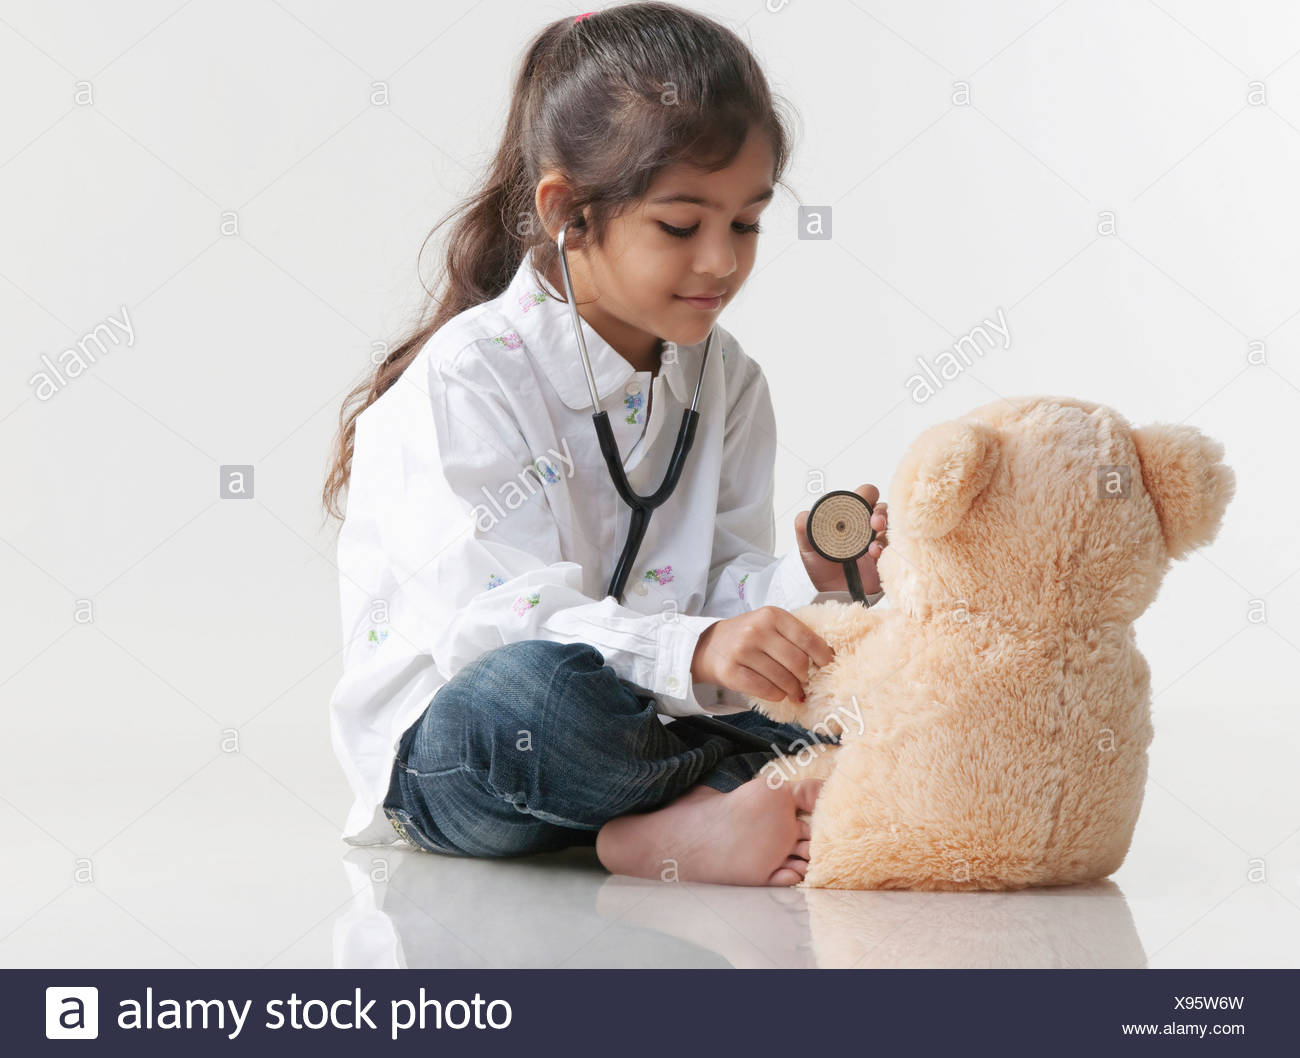 Young girl playing doctor, petite sizes formal dress